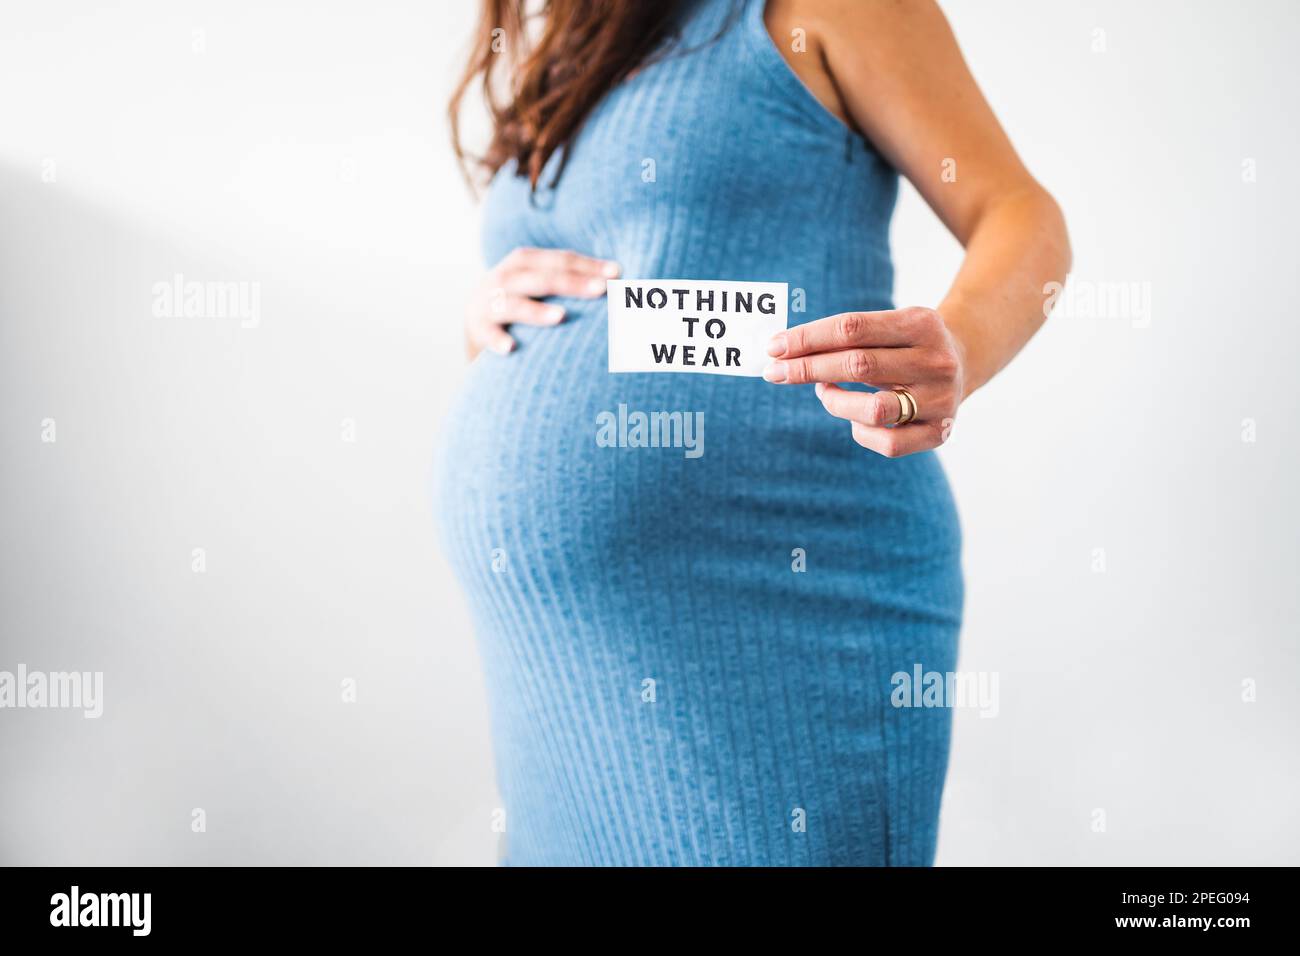 Nothing to Wear sign held by pregnant woman in the last month of